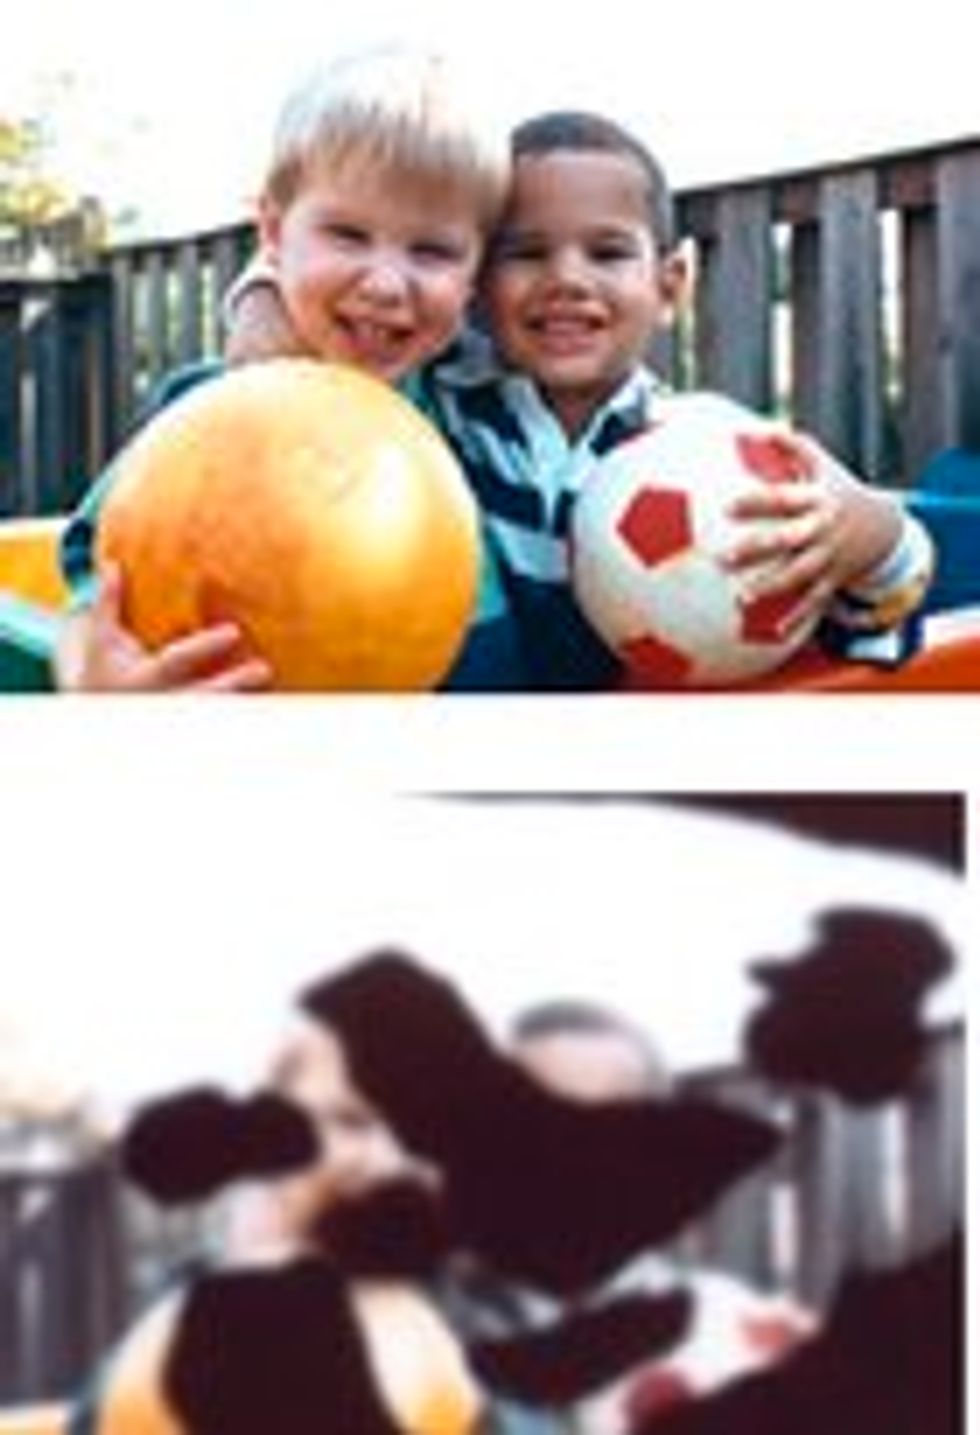 Two photographs showing boys holding soccer balls. The first photo is clear, the second is covered with black splotches.